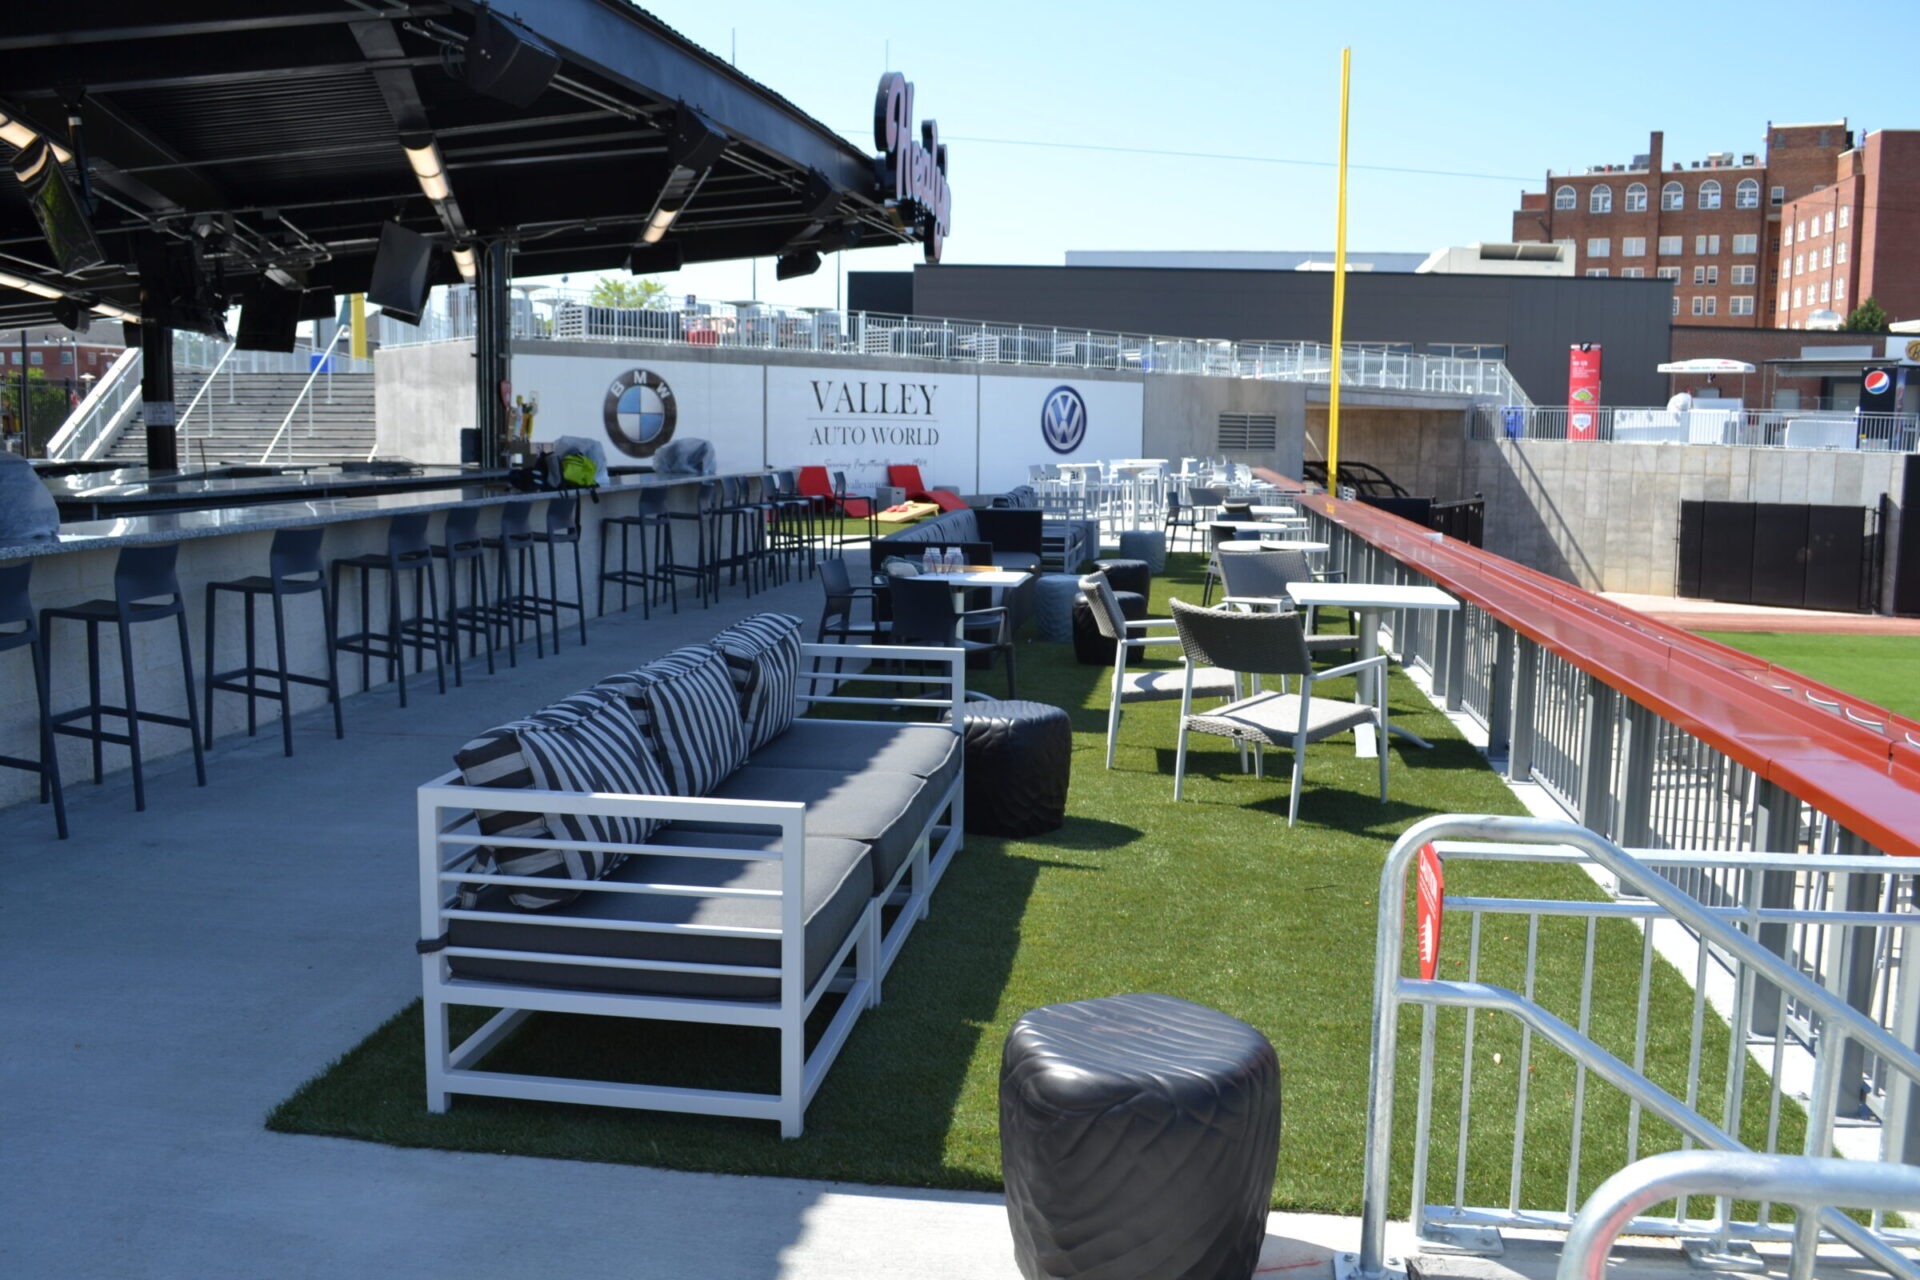 This image shows an outdoor lounge area with modern furniture, artificial grass, a bar, and a clear view of a sports field's foul pole.